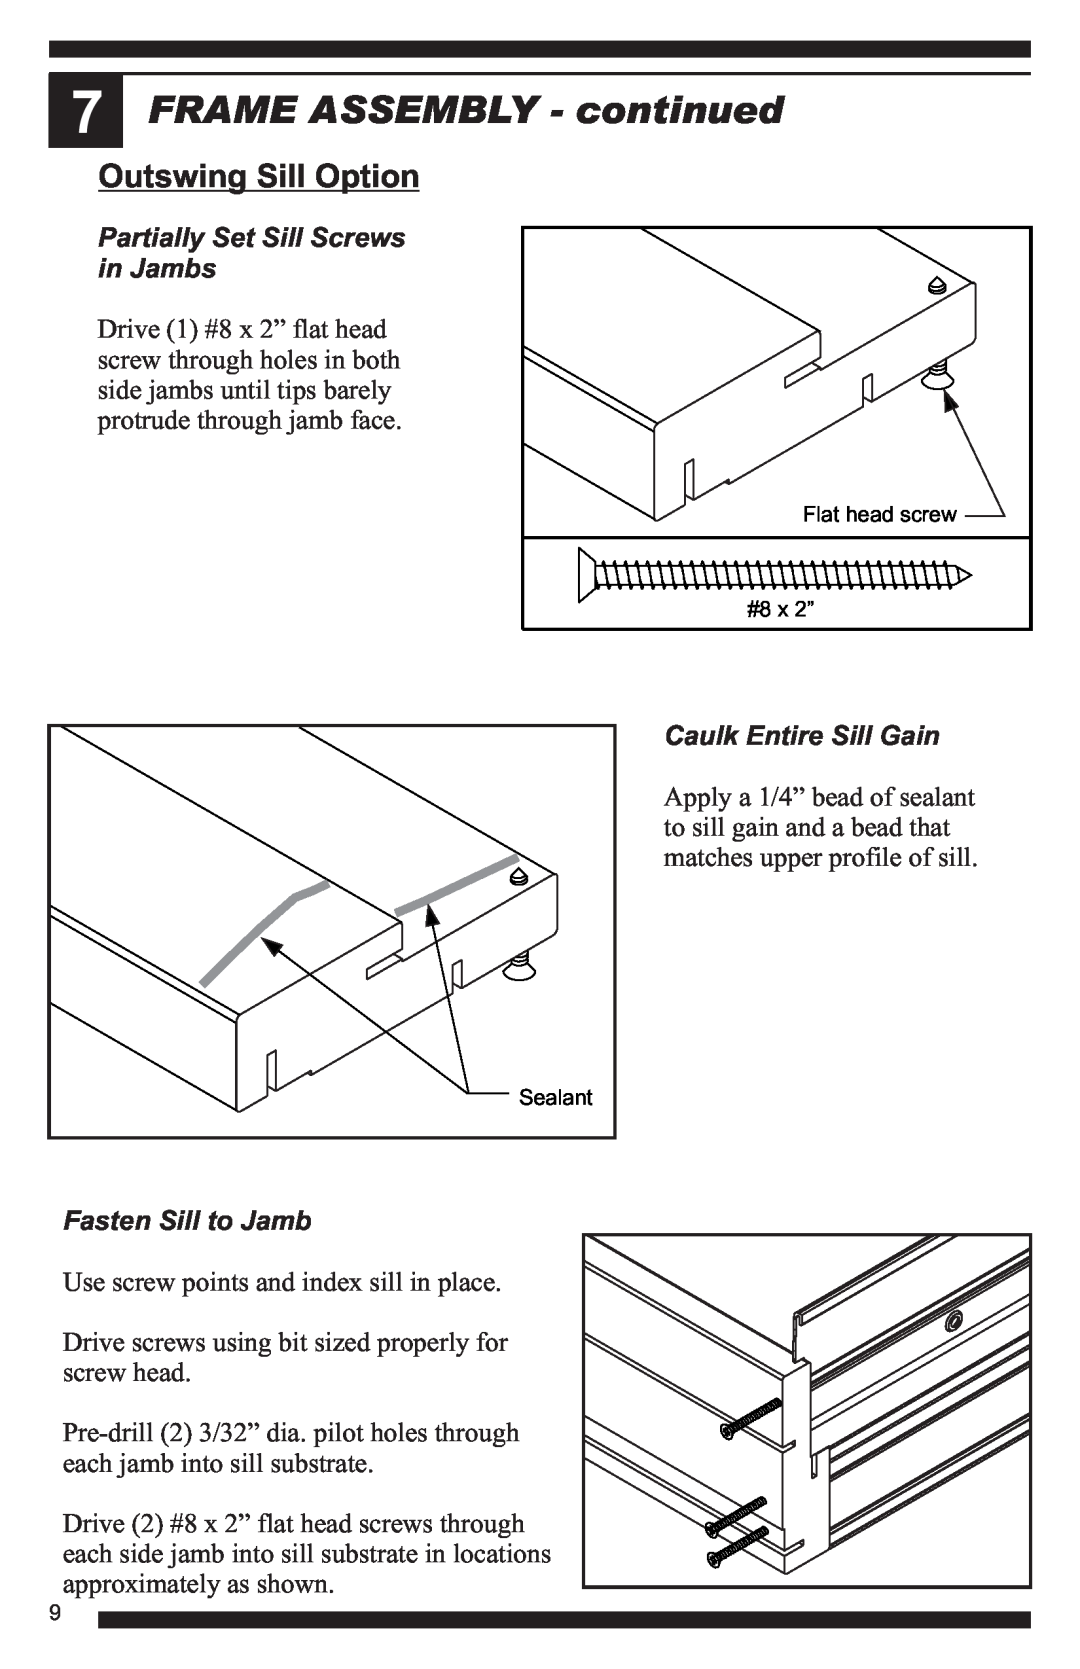 Therma-Tru Hinged Patio Door System Single Panel Assembly Unit manual FRAME ASSEMBLY - continued, Outswing Sill Option 